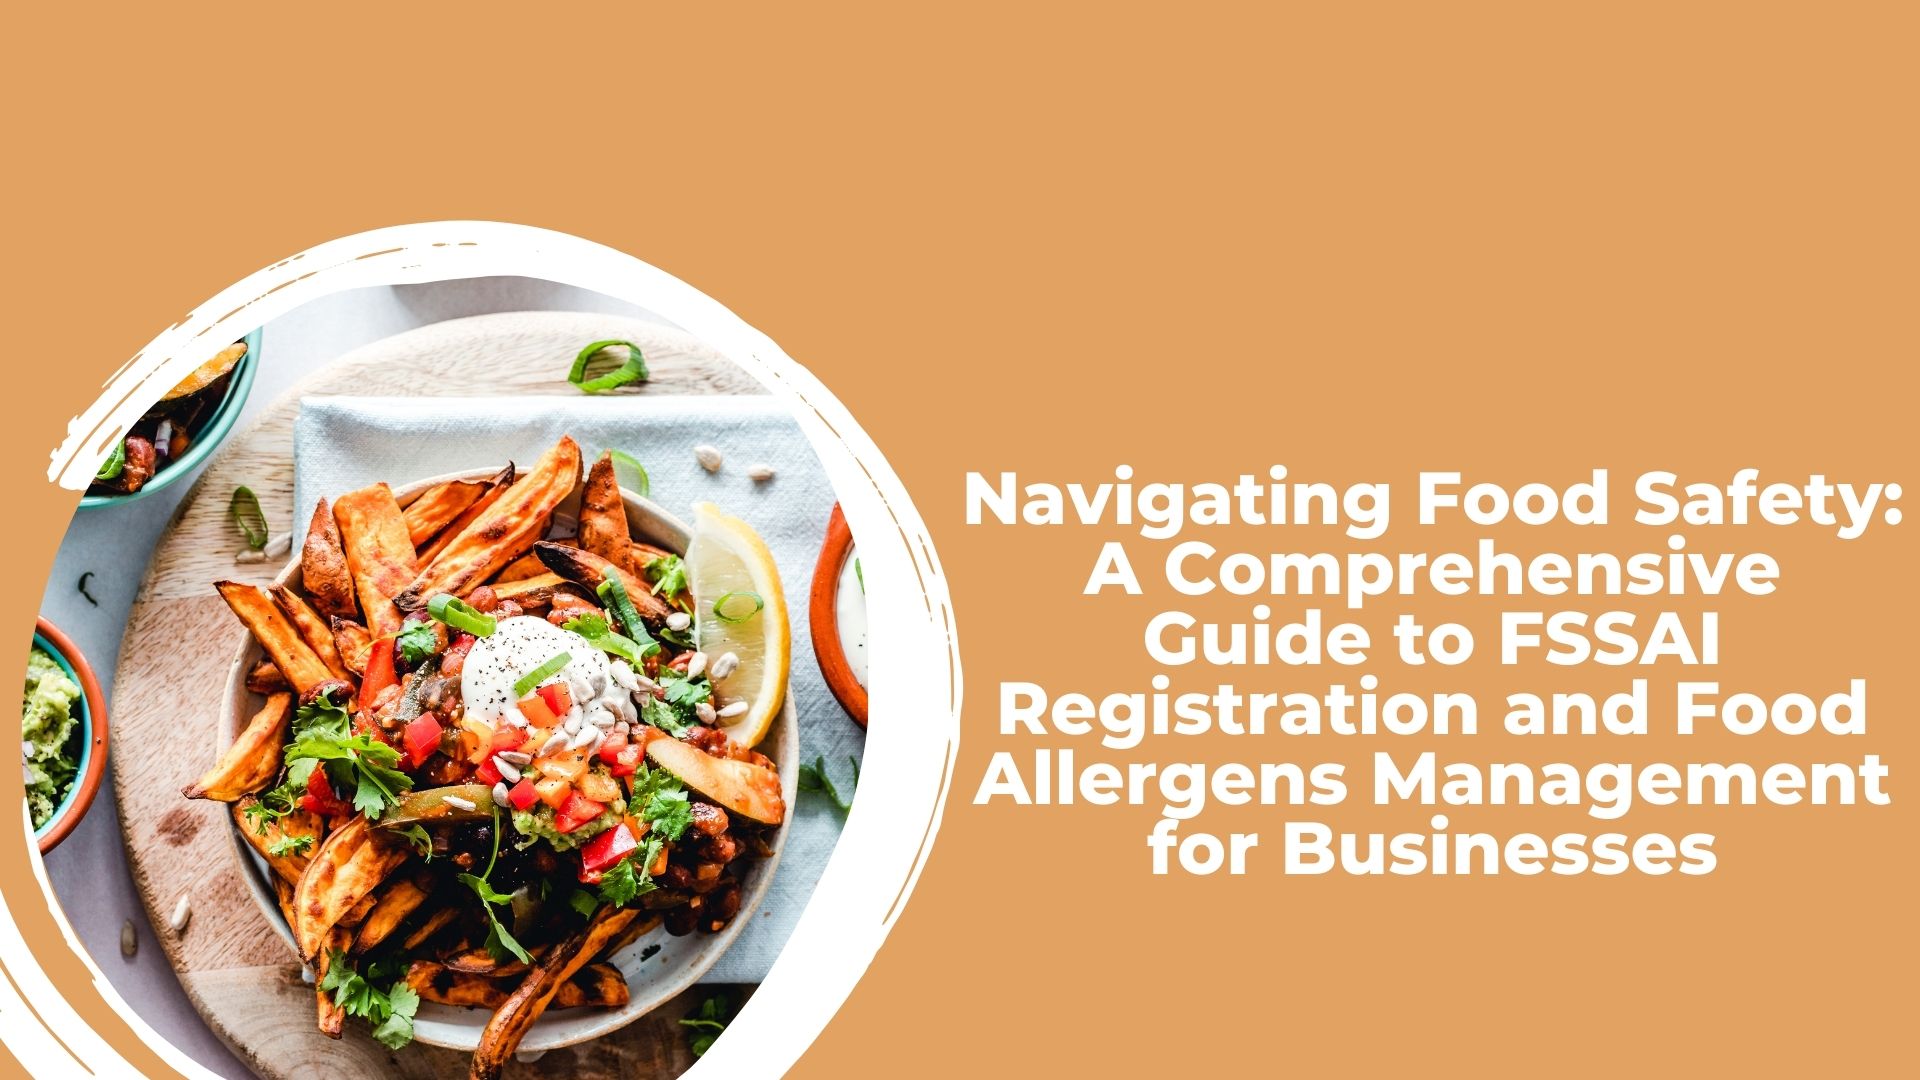 Navigating Food Safety: A Comprehensive Guide to FSSAI Registration and Food Allergens Management for Businesses